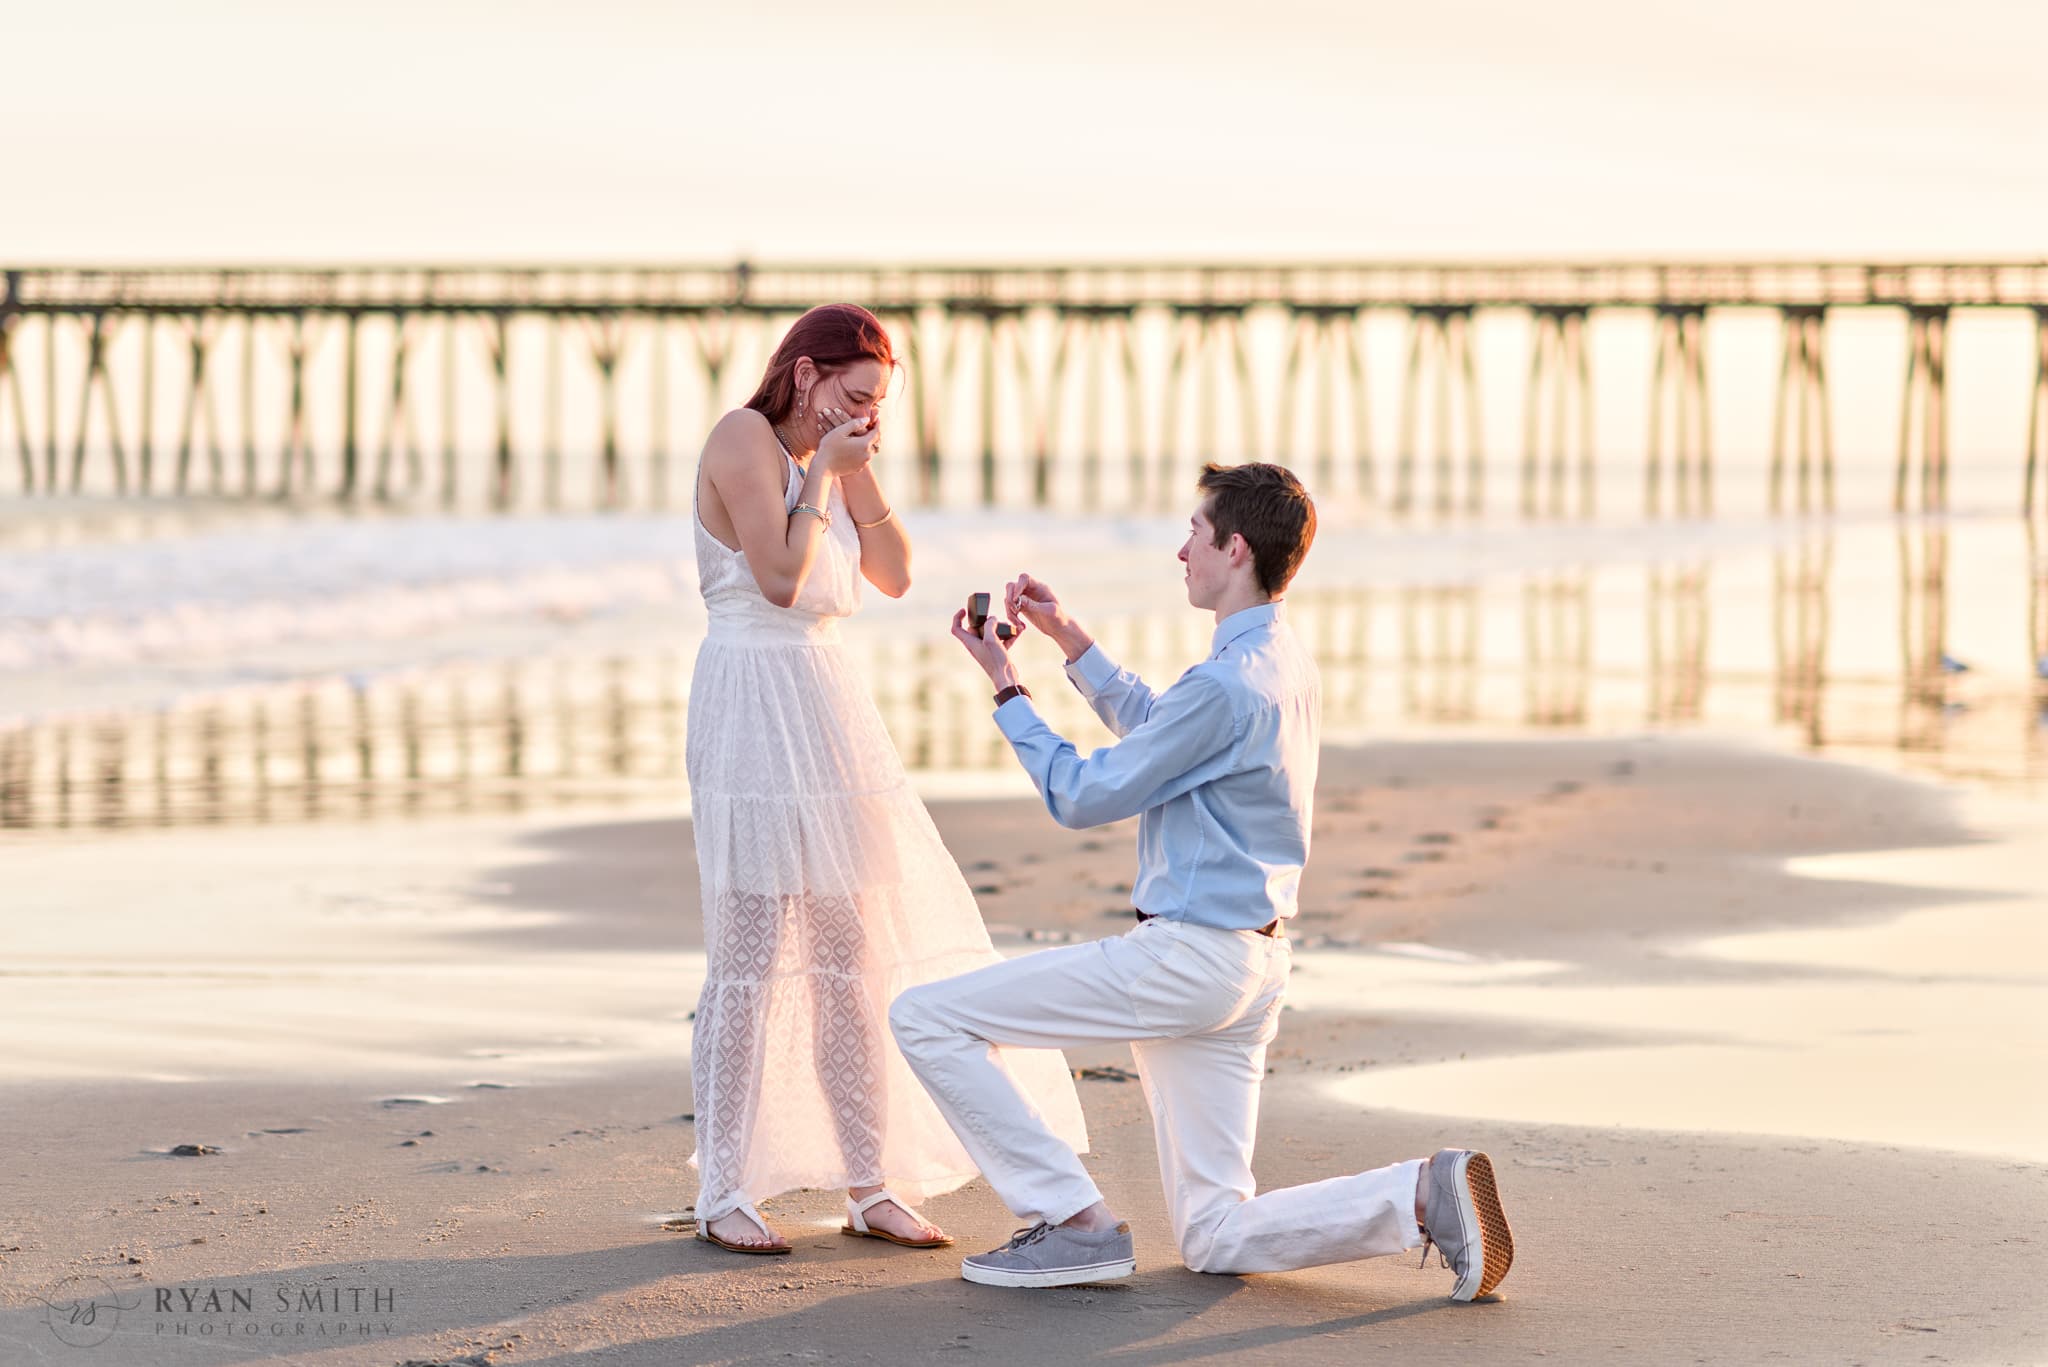 She said yes - Myrtle Beach State Park